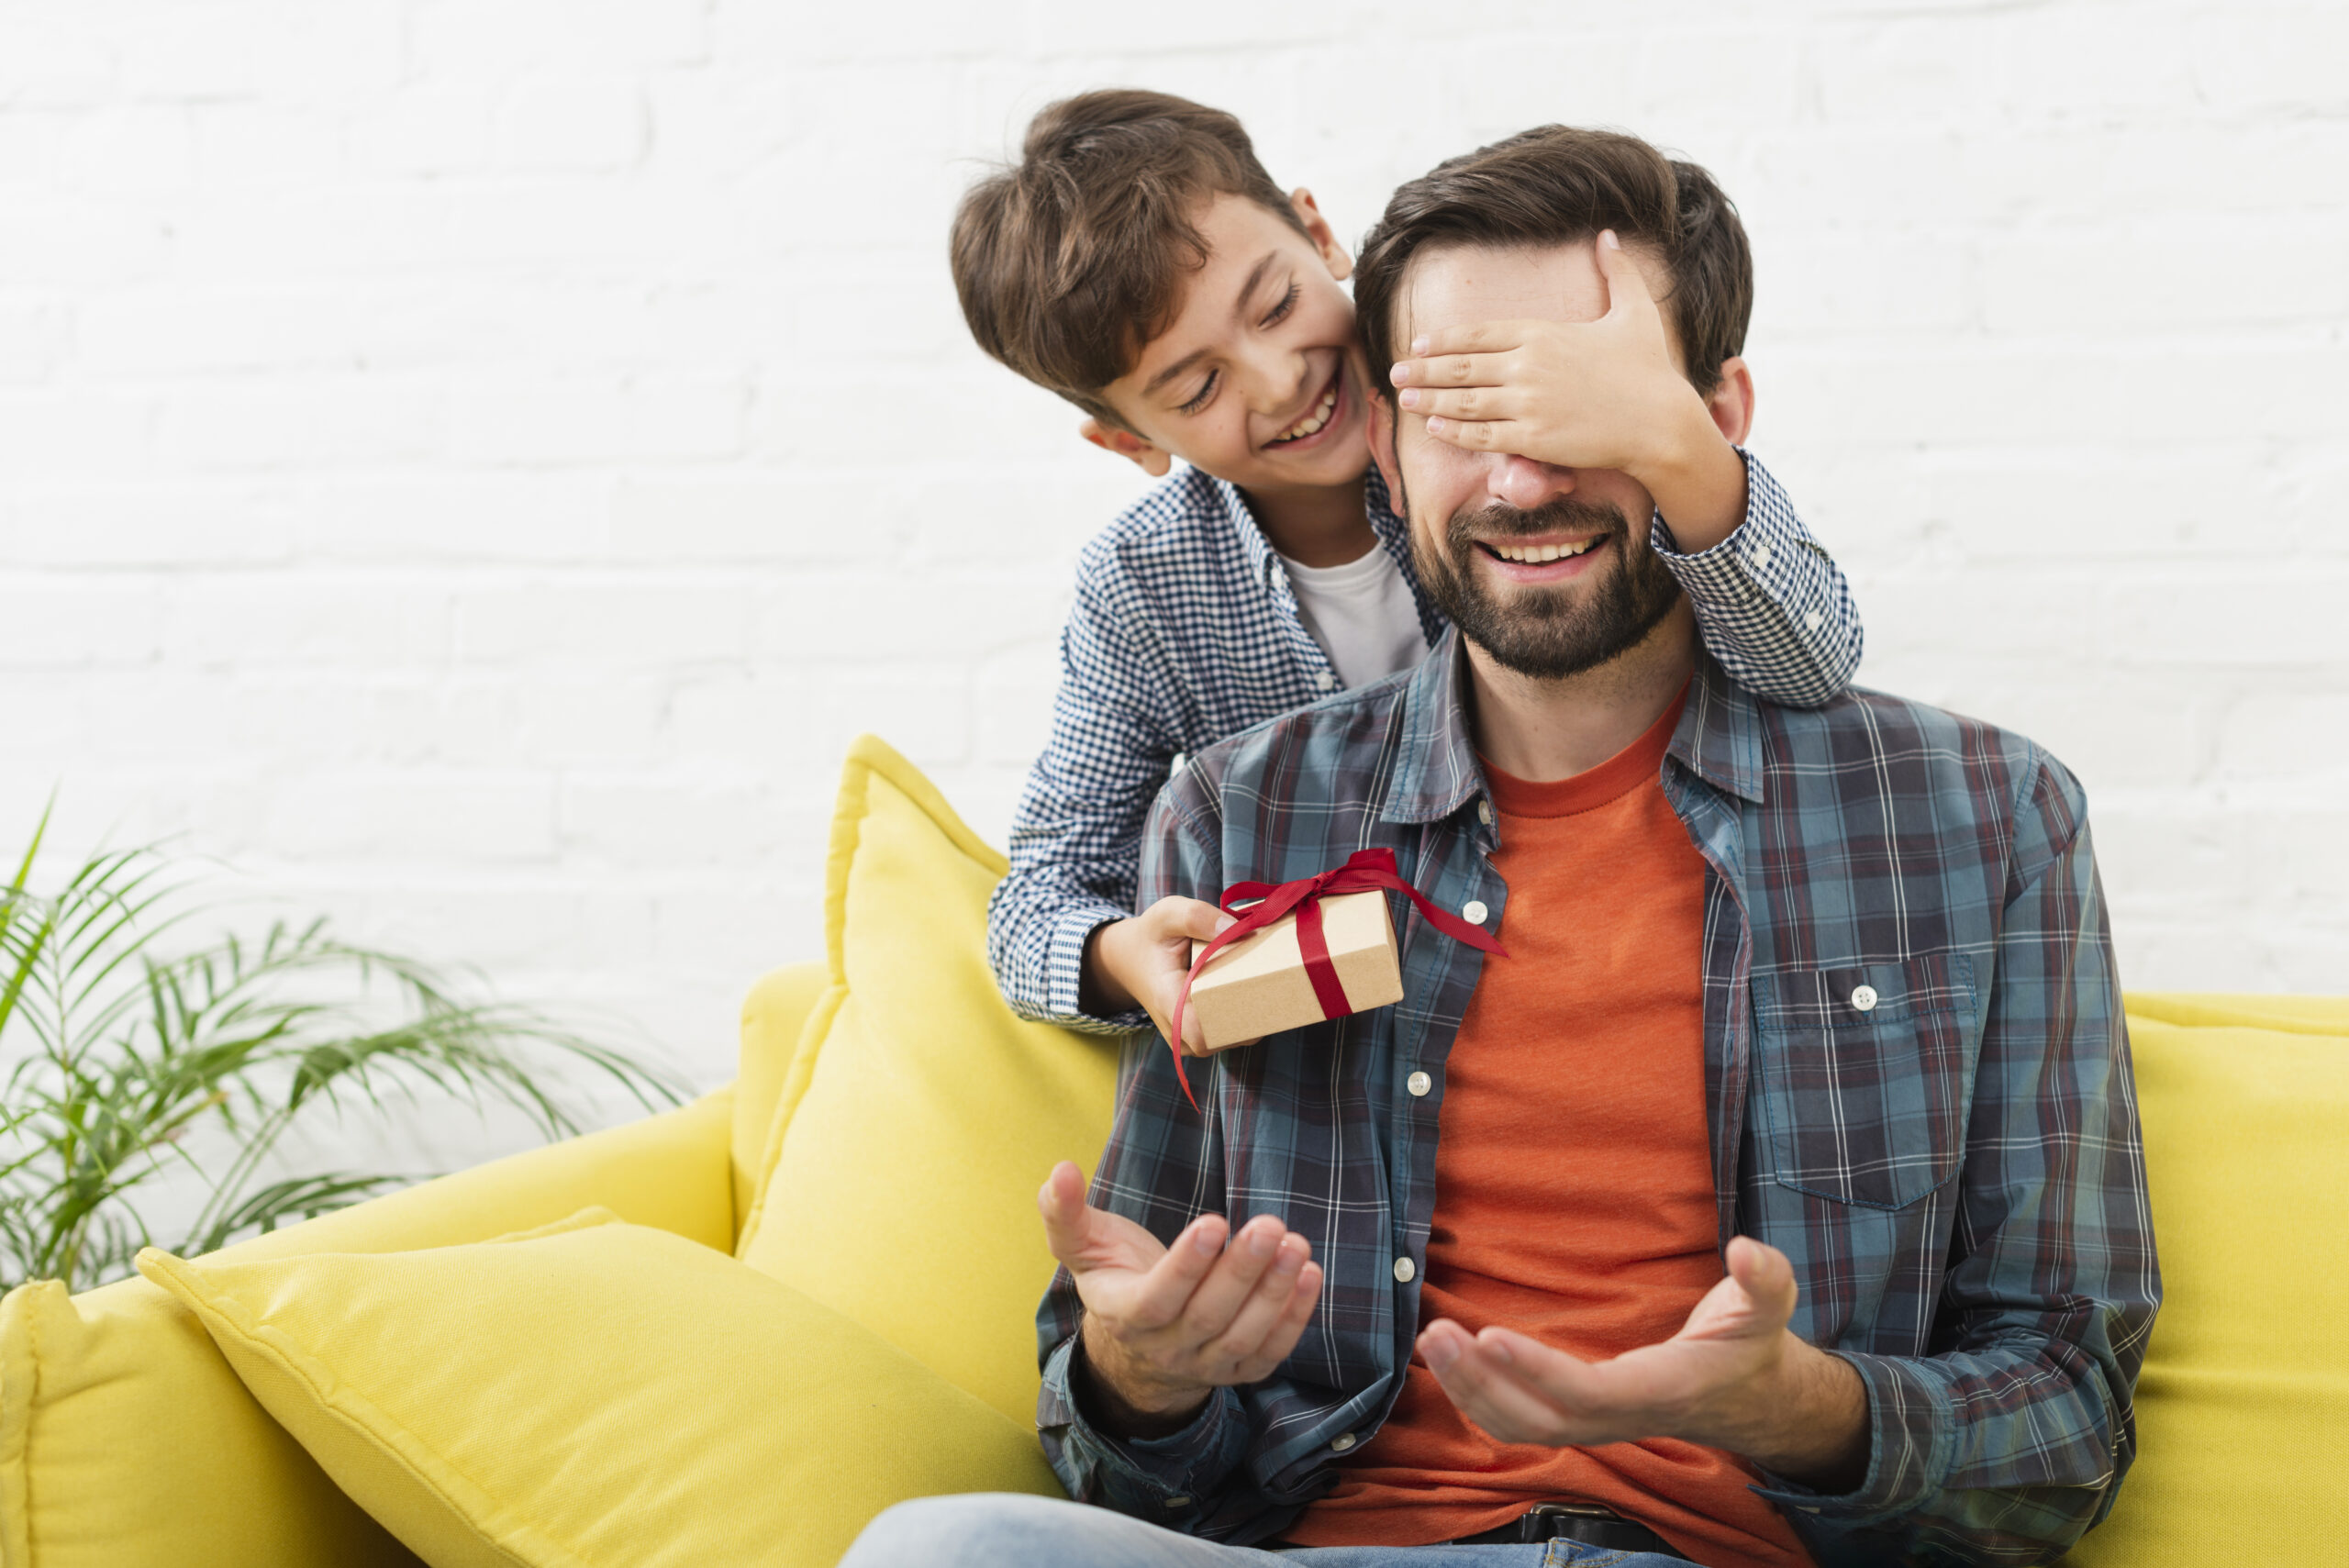 10 Thoughtful Gift Ideas to Celebrate Father’s Day